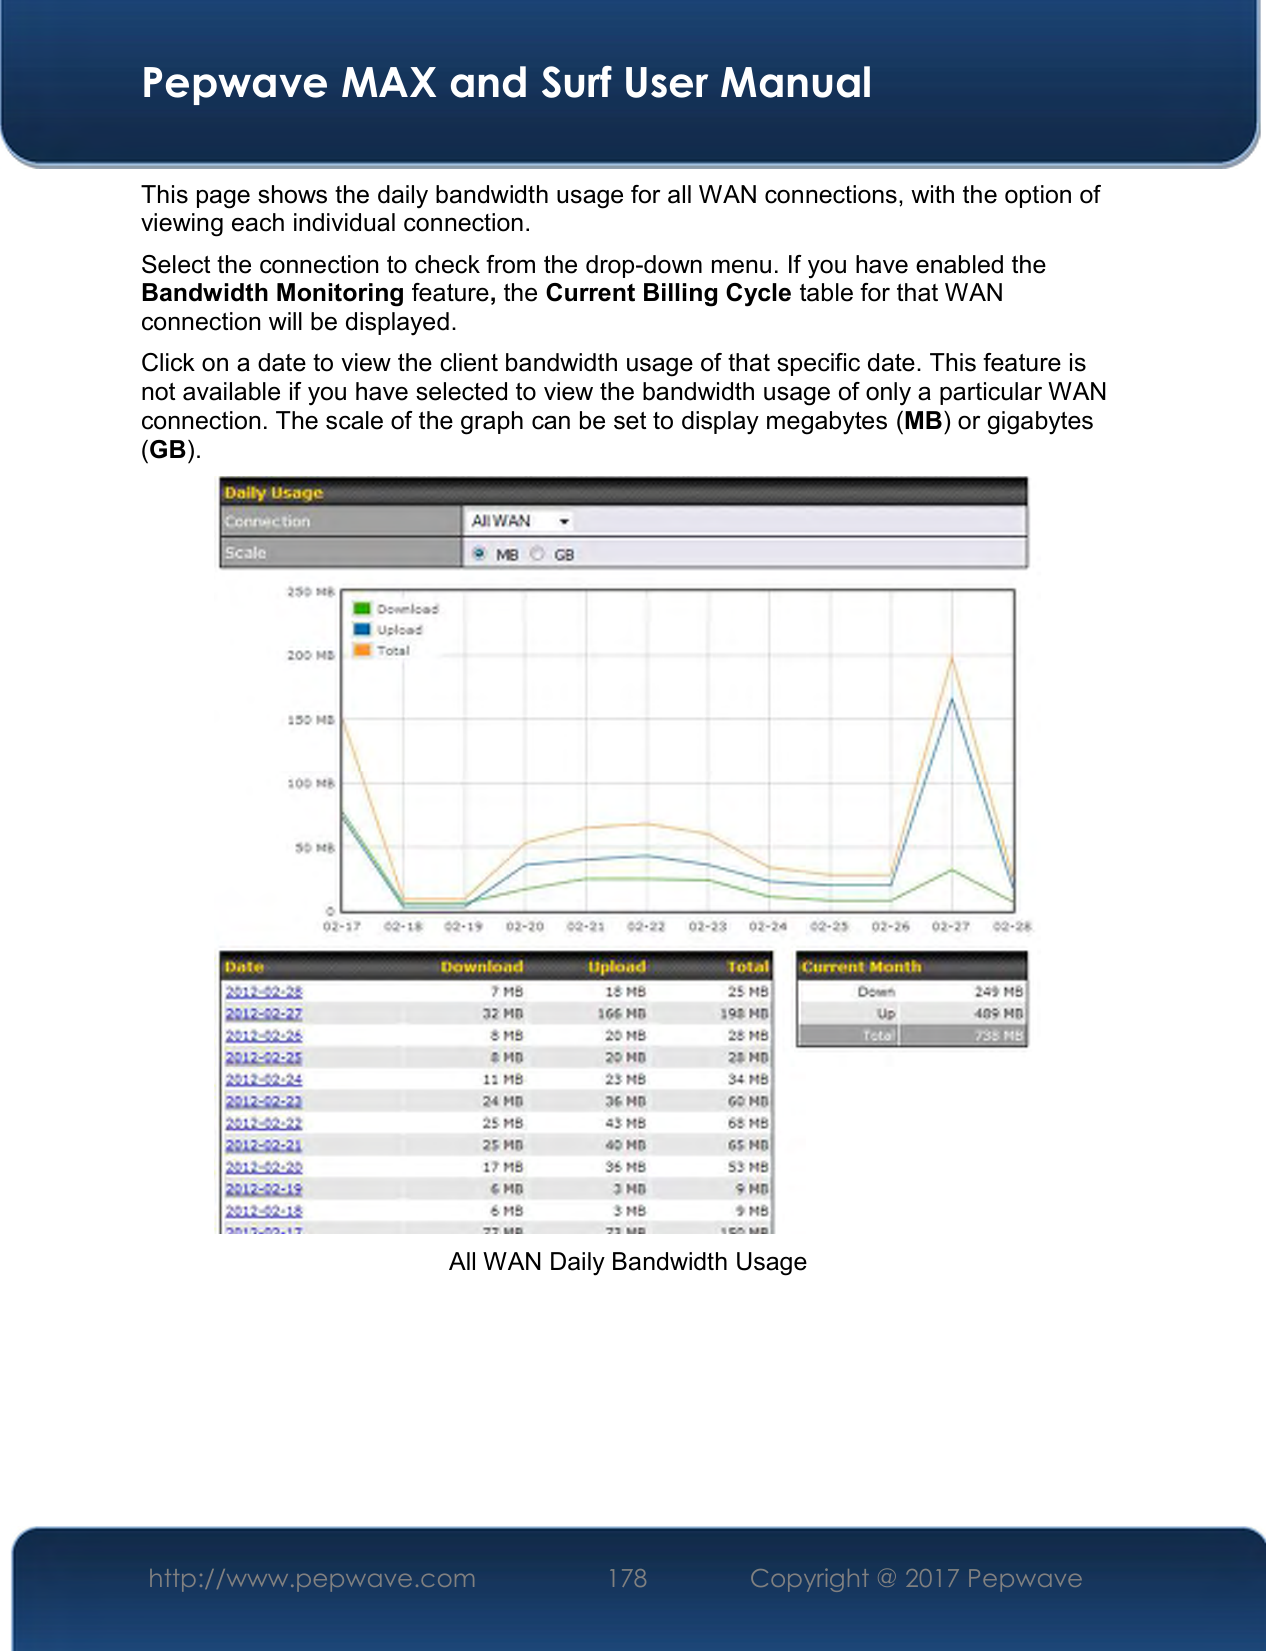  Pepwave MAX and Surf User Manual http://www.pepwave.com  178    Copyright @ 2017 Pepwave   This page shows the daily bandwidth usage for all WAN connections, with the option of viewing each individual connection.  Select the connection to check from the drop-down menu. If you have enabled the Bandwidth Monitoring feature, the Current Billing Cycle table for that WAN connection will be displayed. Click on a date to view the client bandwidth usage of that specific date. This feature is not available if you have selected to view the bandwidth usage of only a particular WAN connection. The scale of the graph can be set to display megabytes (MB) or gigabytes (GB).  All WAN Daily Bandwidth Usage    